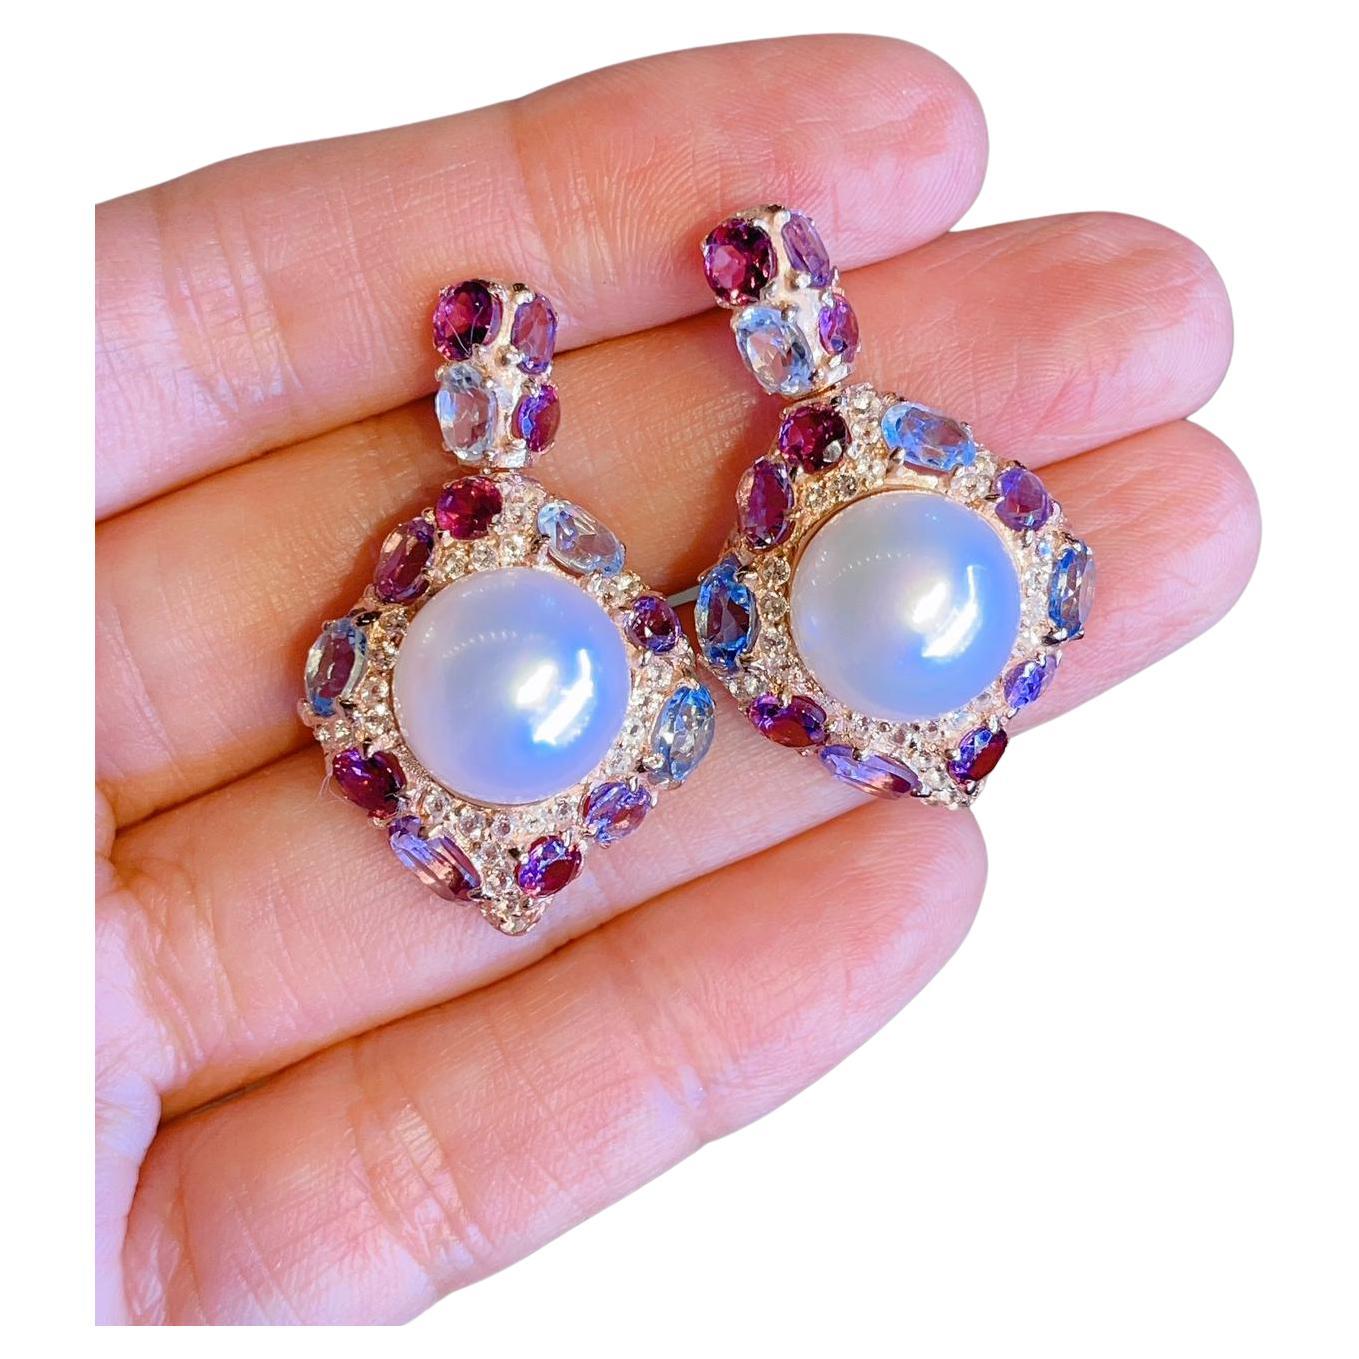 Bochic “Capri” South Sea Pearl Earrings with Natural Amethyst, Topaz & Rdorite For Sale